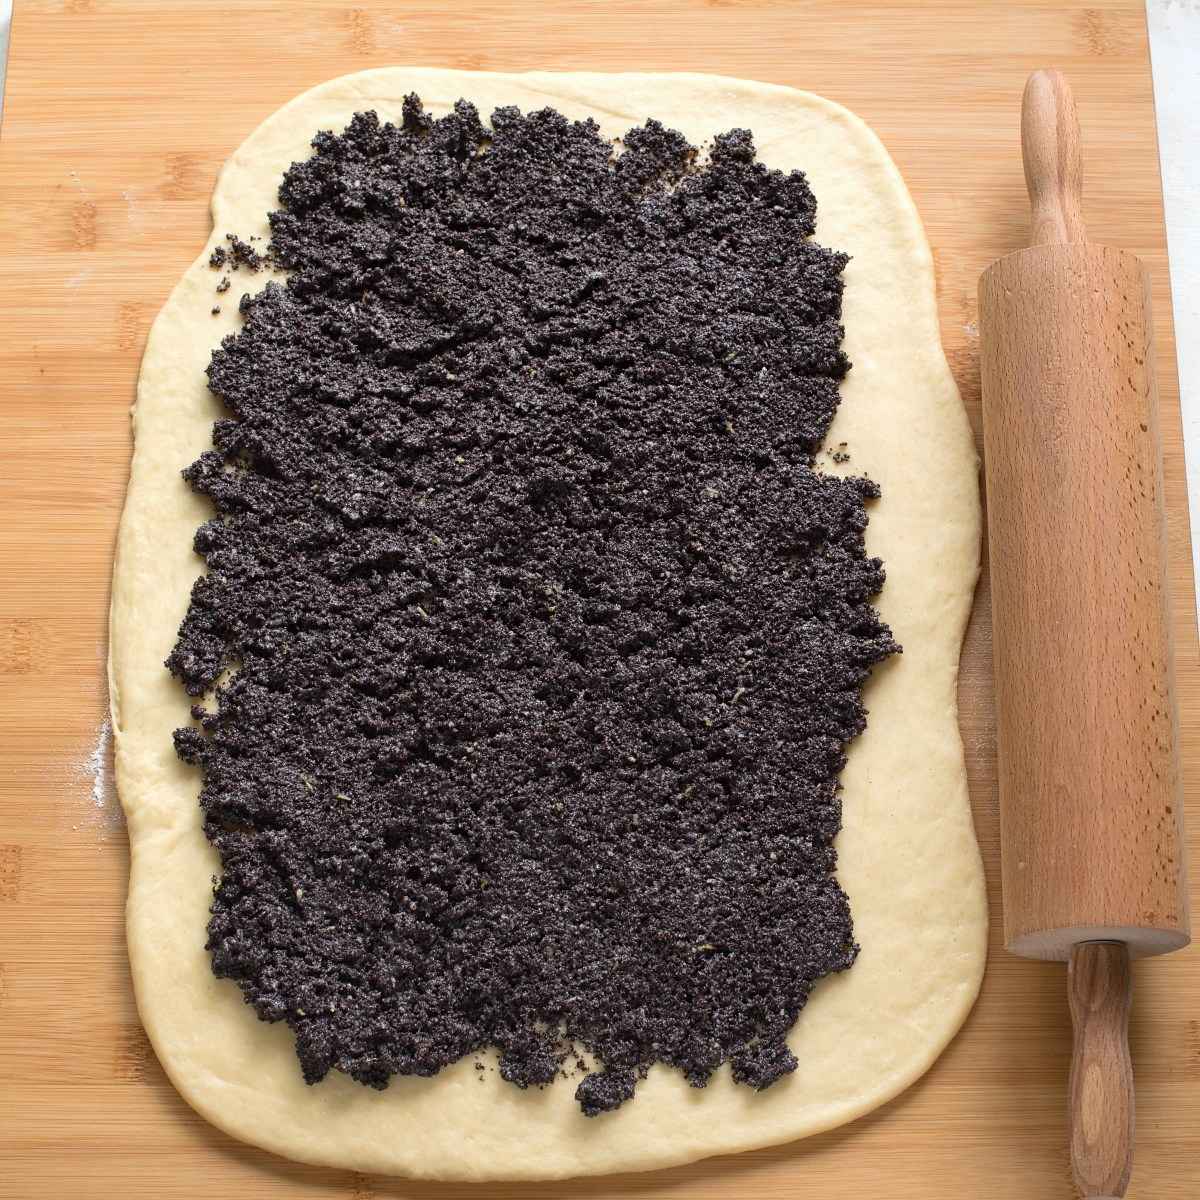 Spreading poppy seed filling over rolled yeast dough.